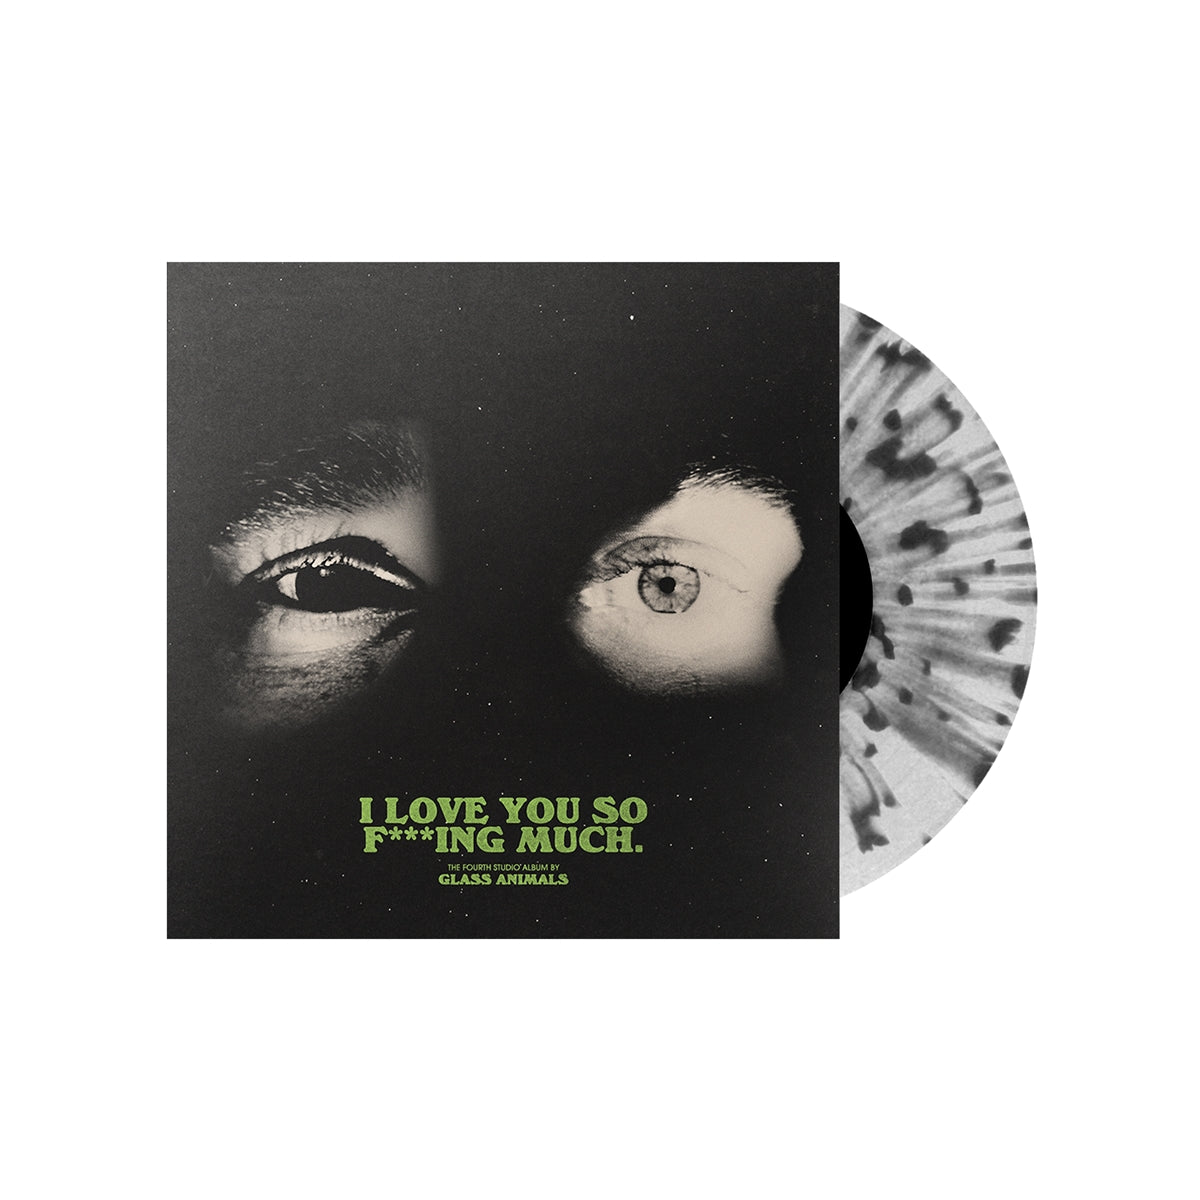 Order Glass Animals - I Love You So F***ing Much (Indie Exclusive, Limited Edition Black & White Splatter Vinyl)